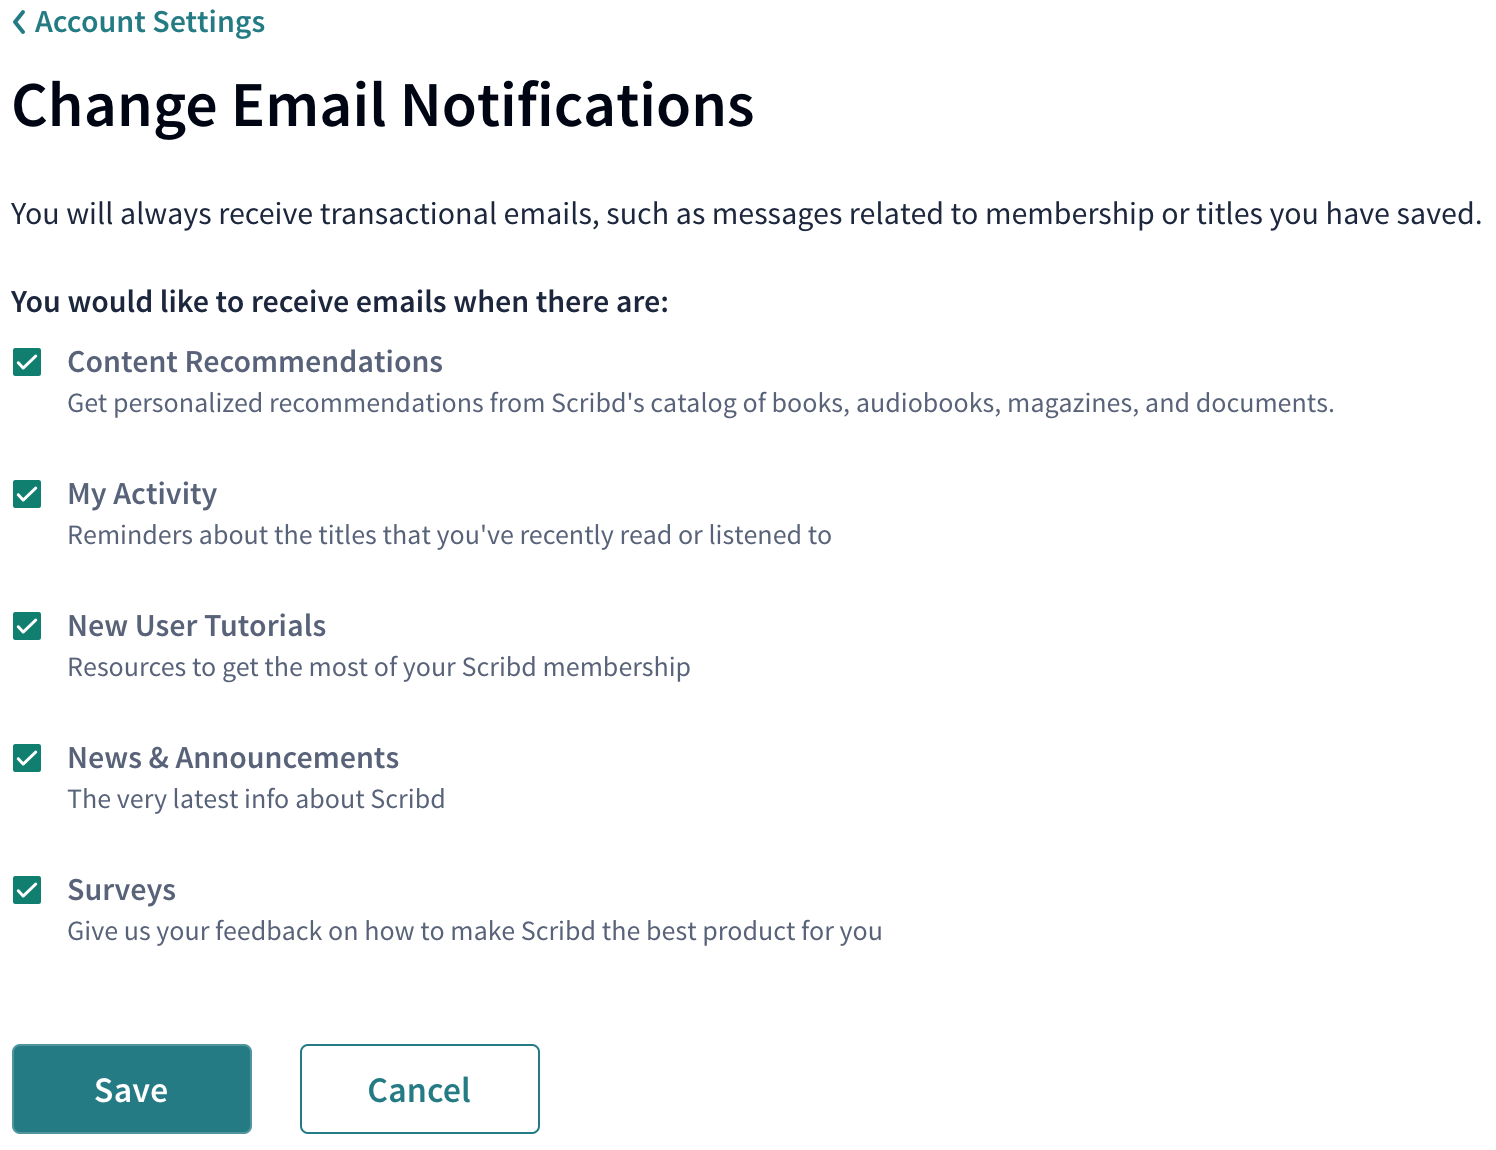 Unsubscribing_from_newsletters_-_Email_settings.png